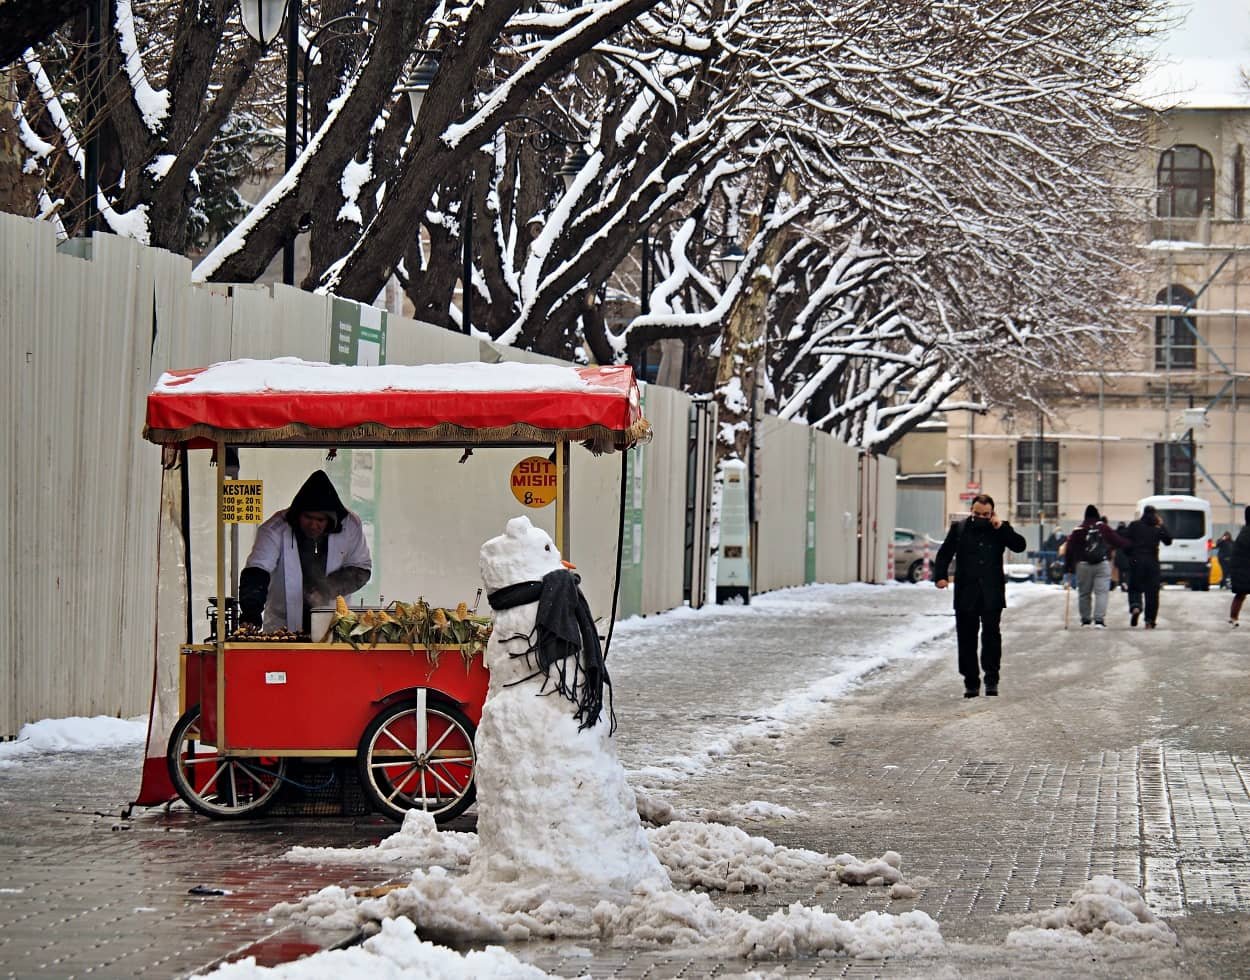 A man selling corn and chestnuts from a bright red cart in the snow iwith a snowman dressed in a car next to him. In the background the trees are covered in snow. Winter in istanbul temperature